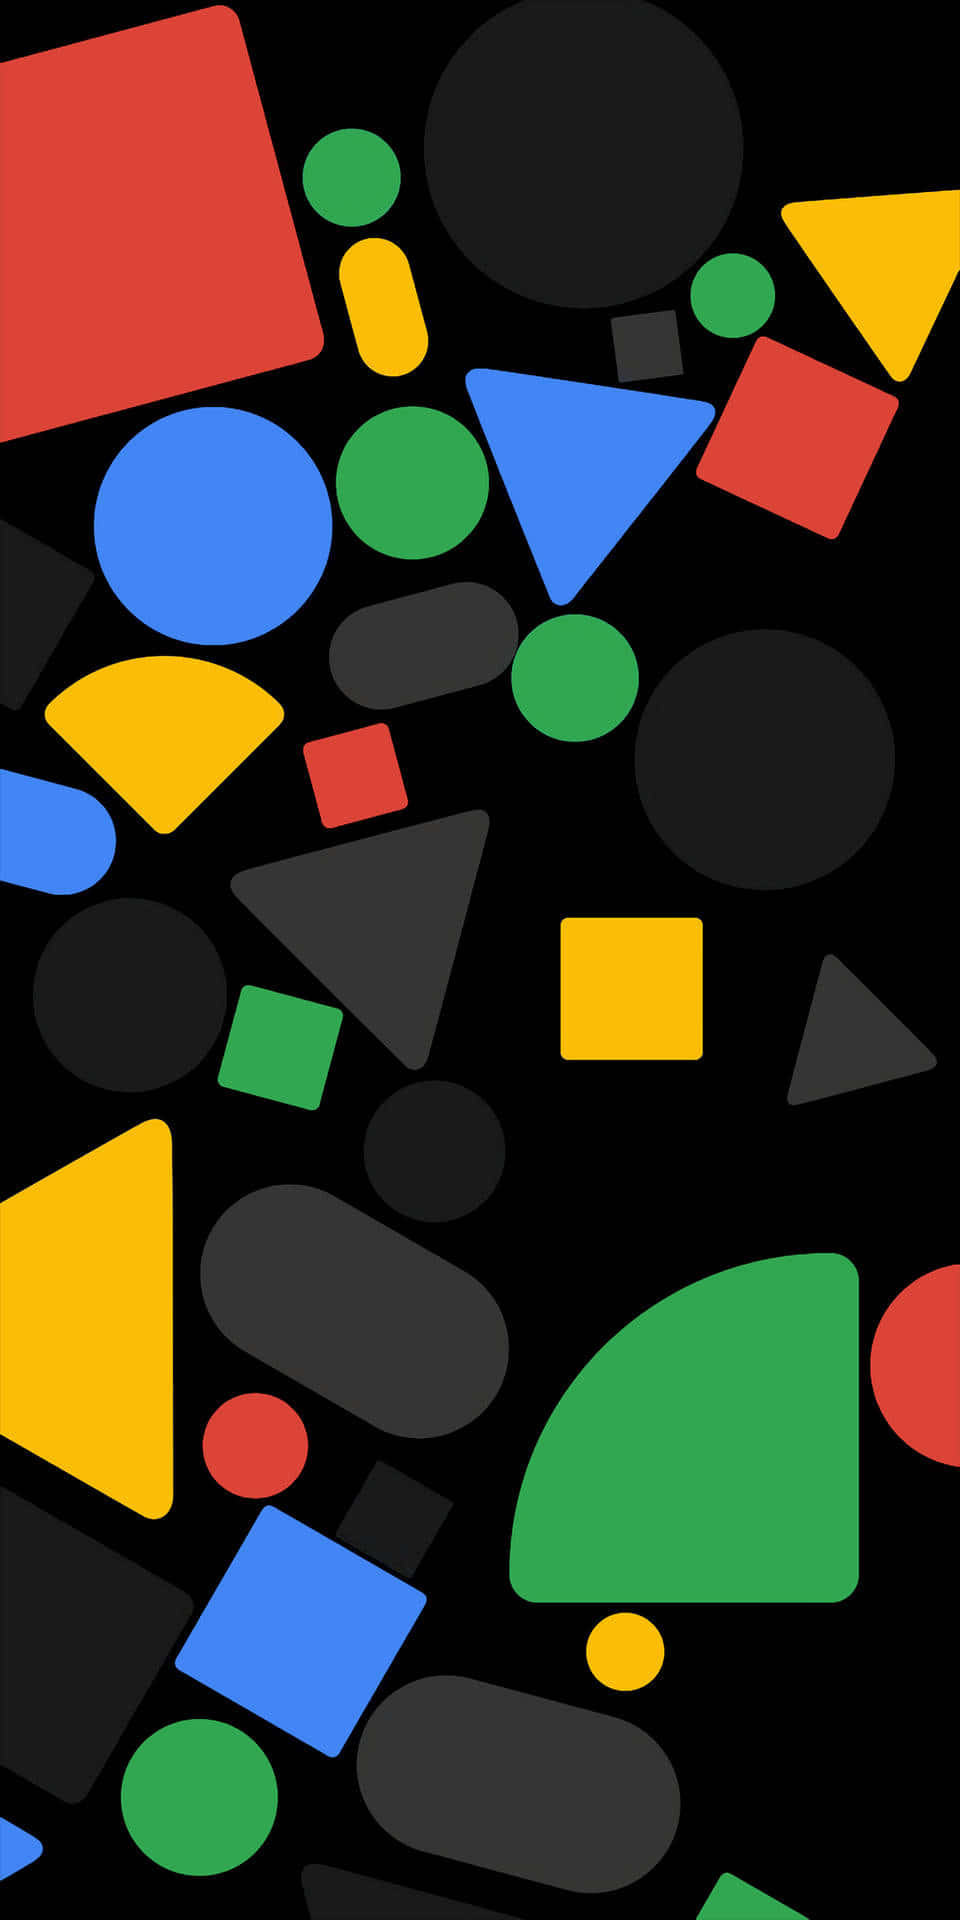 A Black Background With Colorful Shapes On It Wallpaper